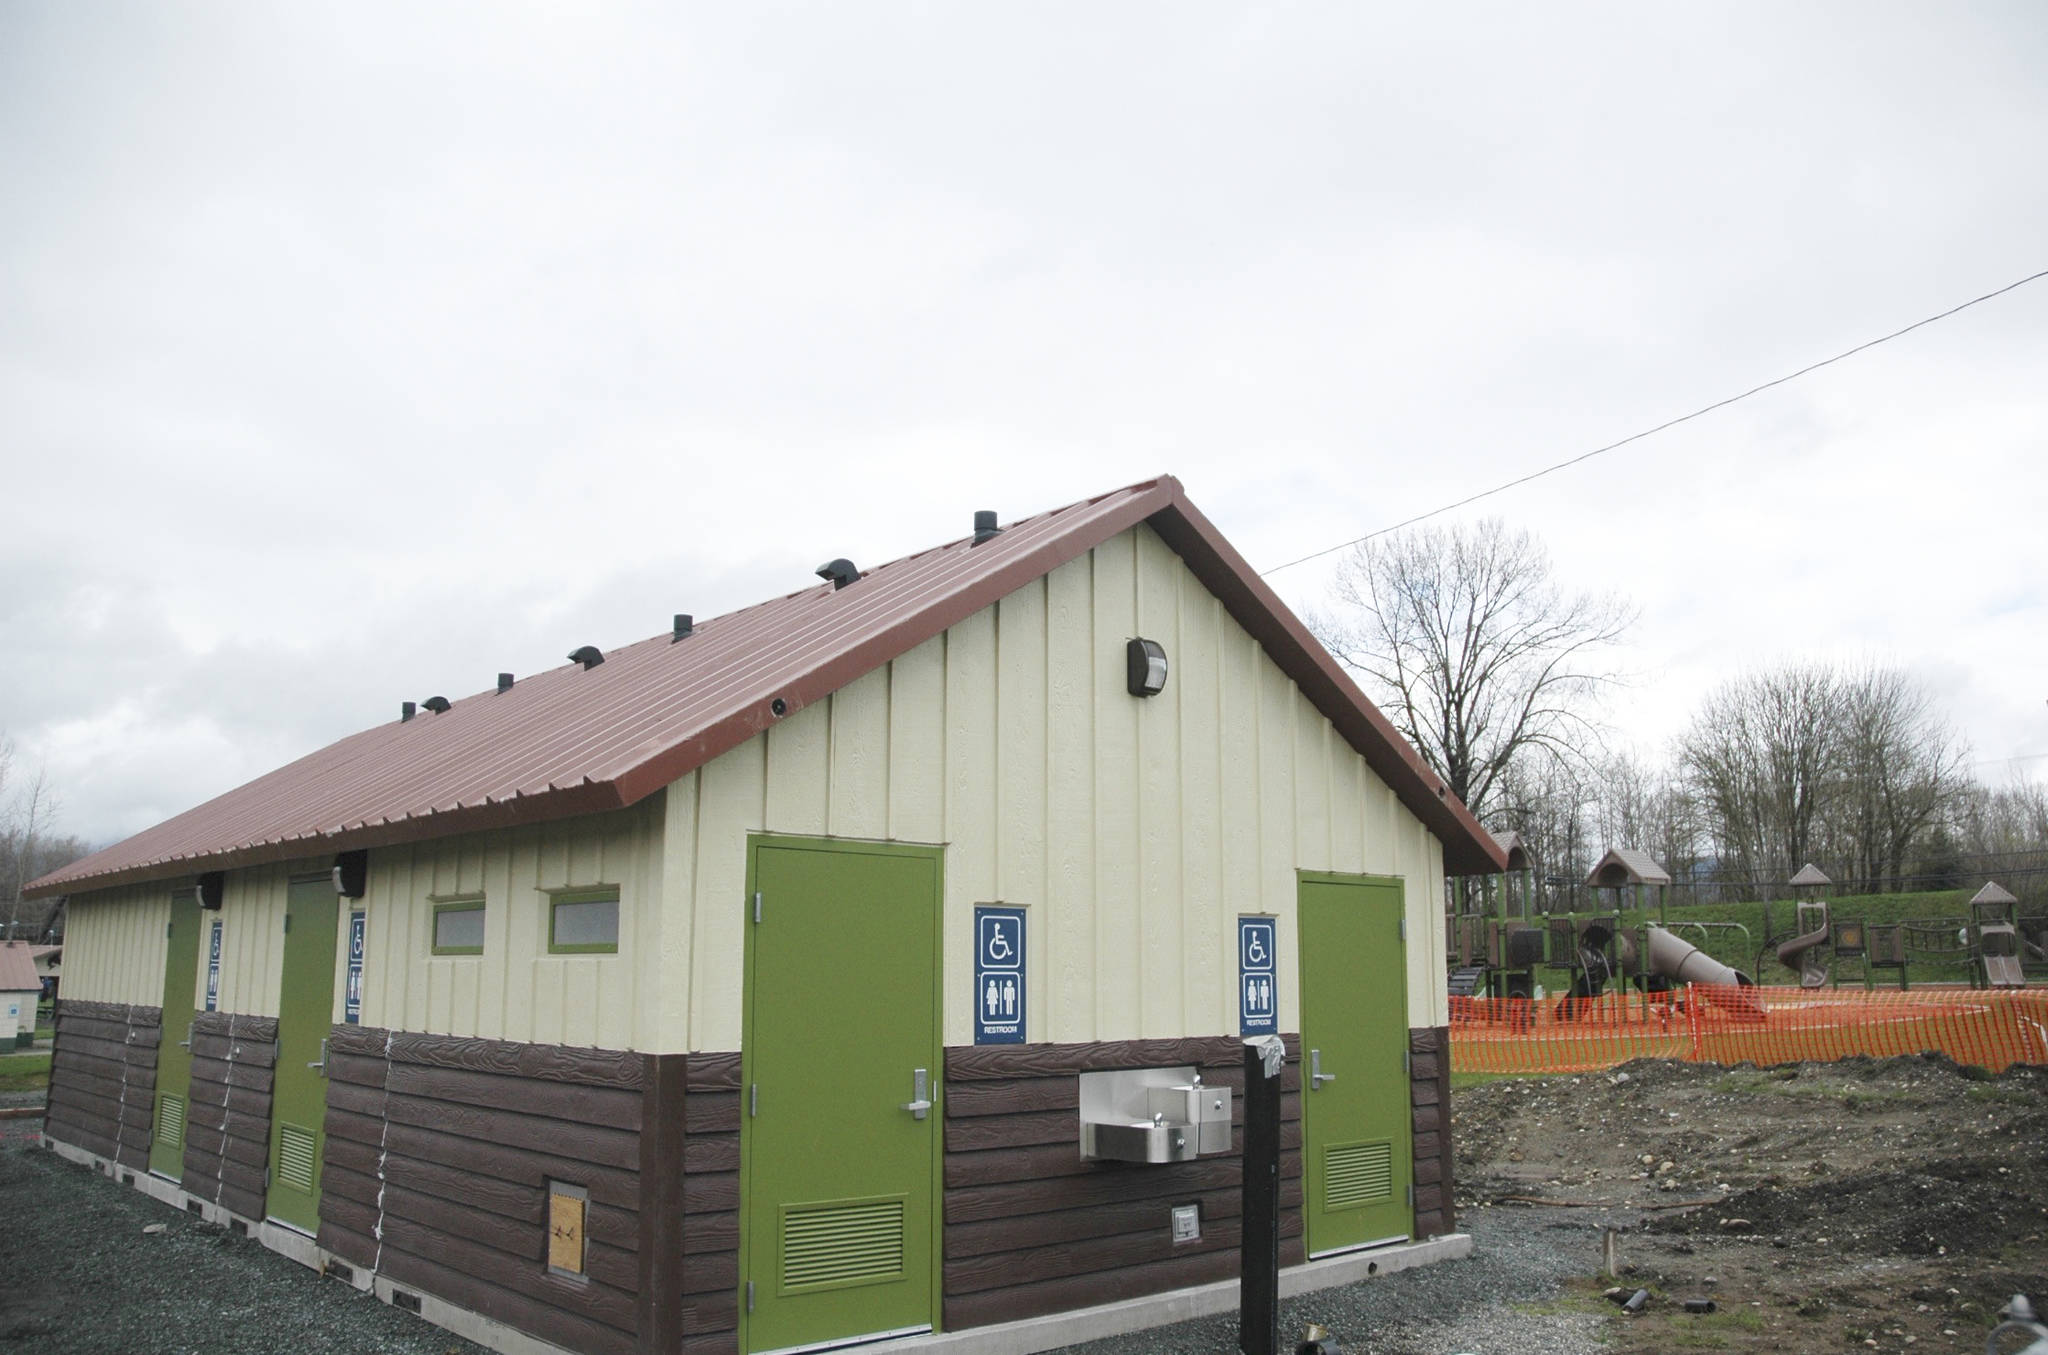 Haller Park 2017 improvements start with new public restroom facility